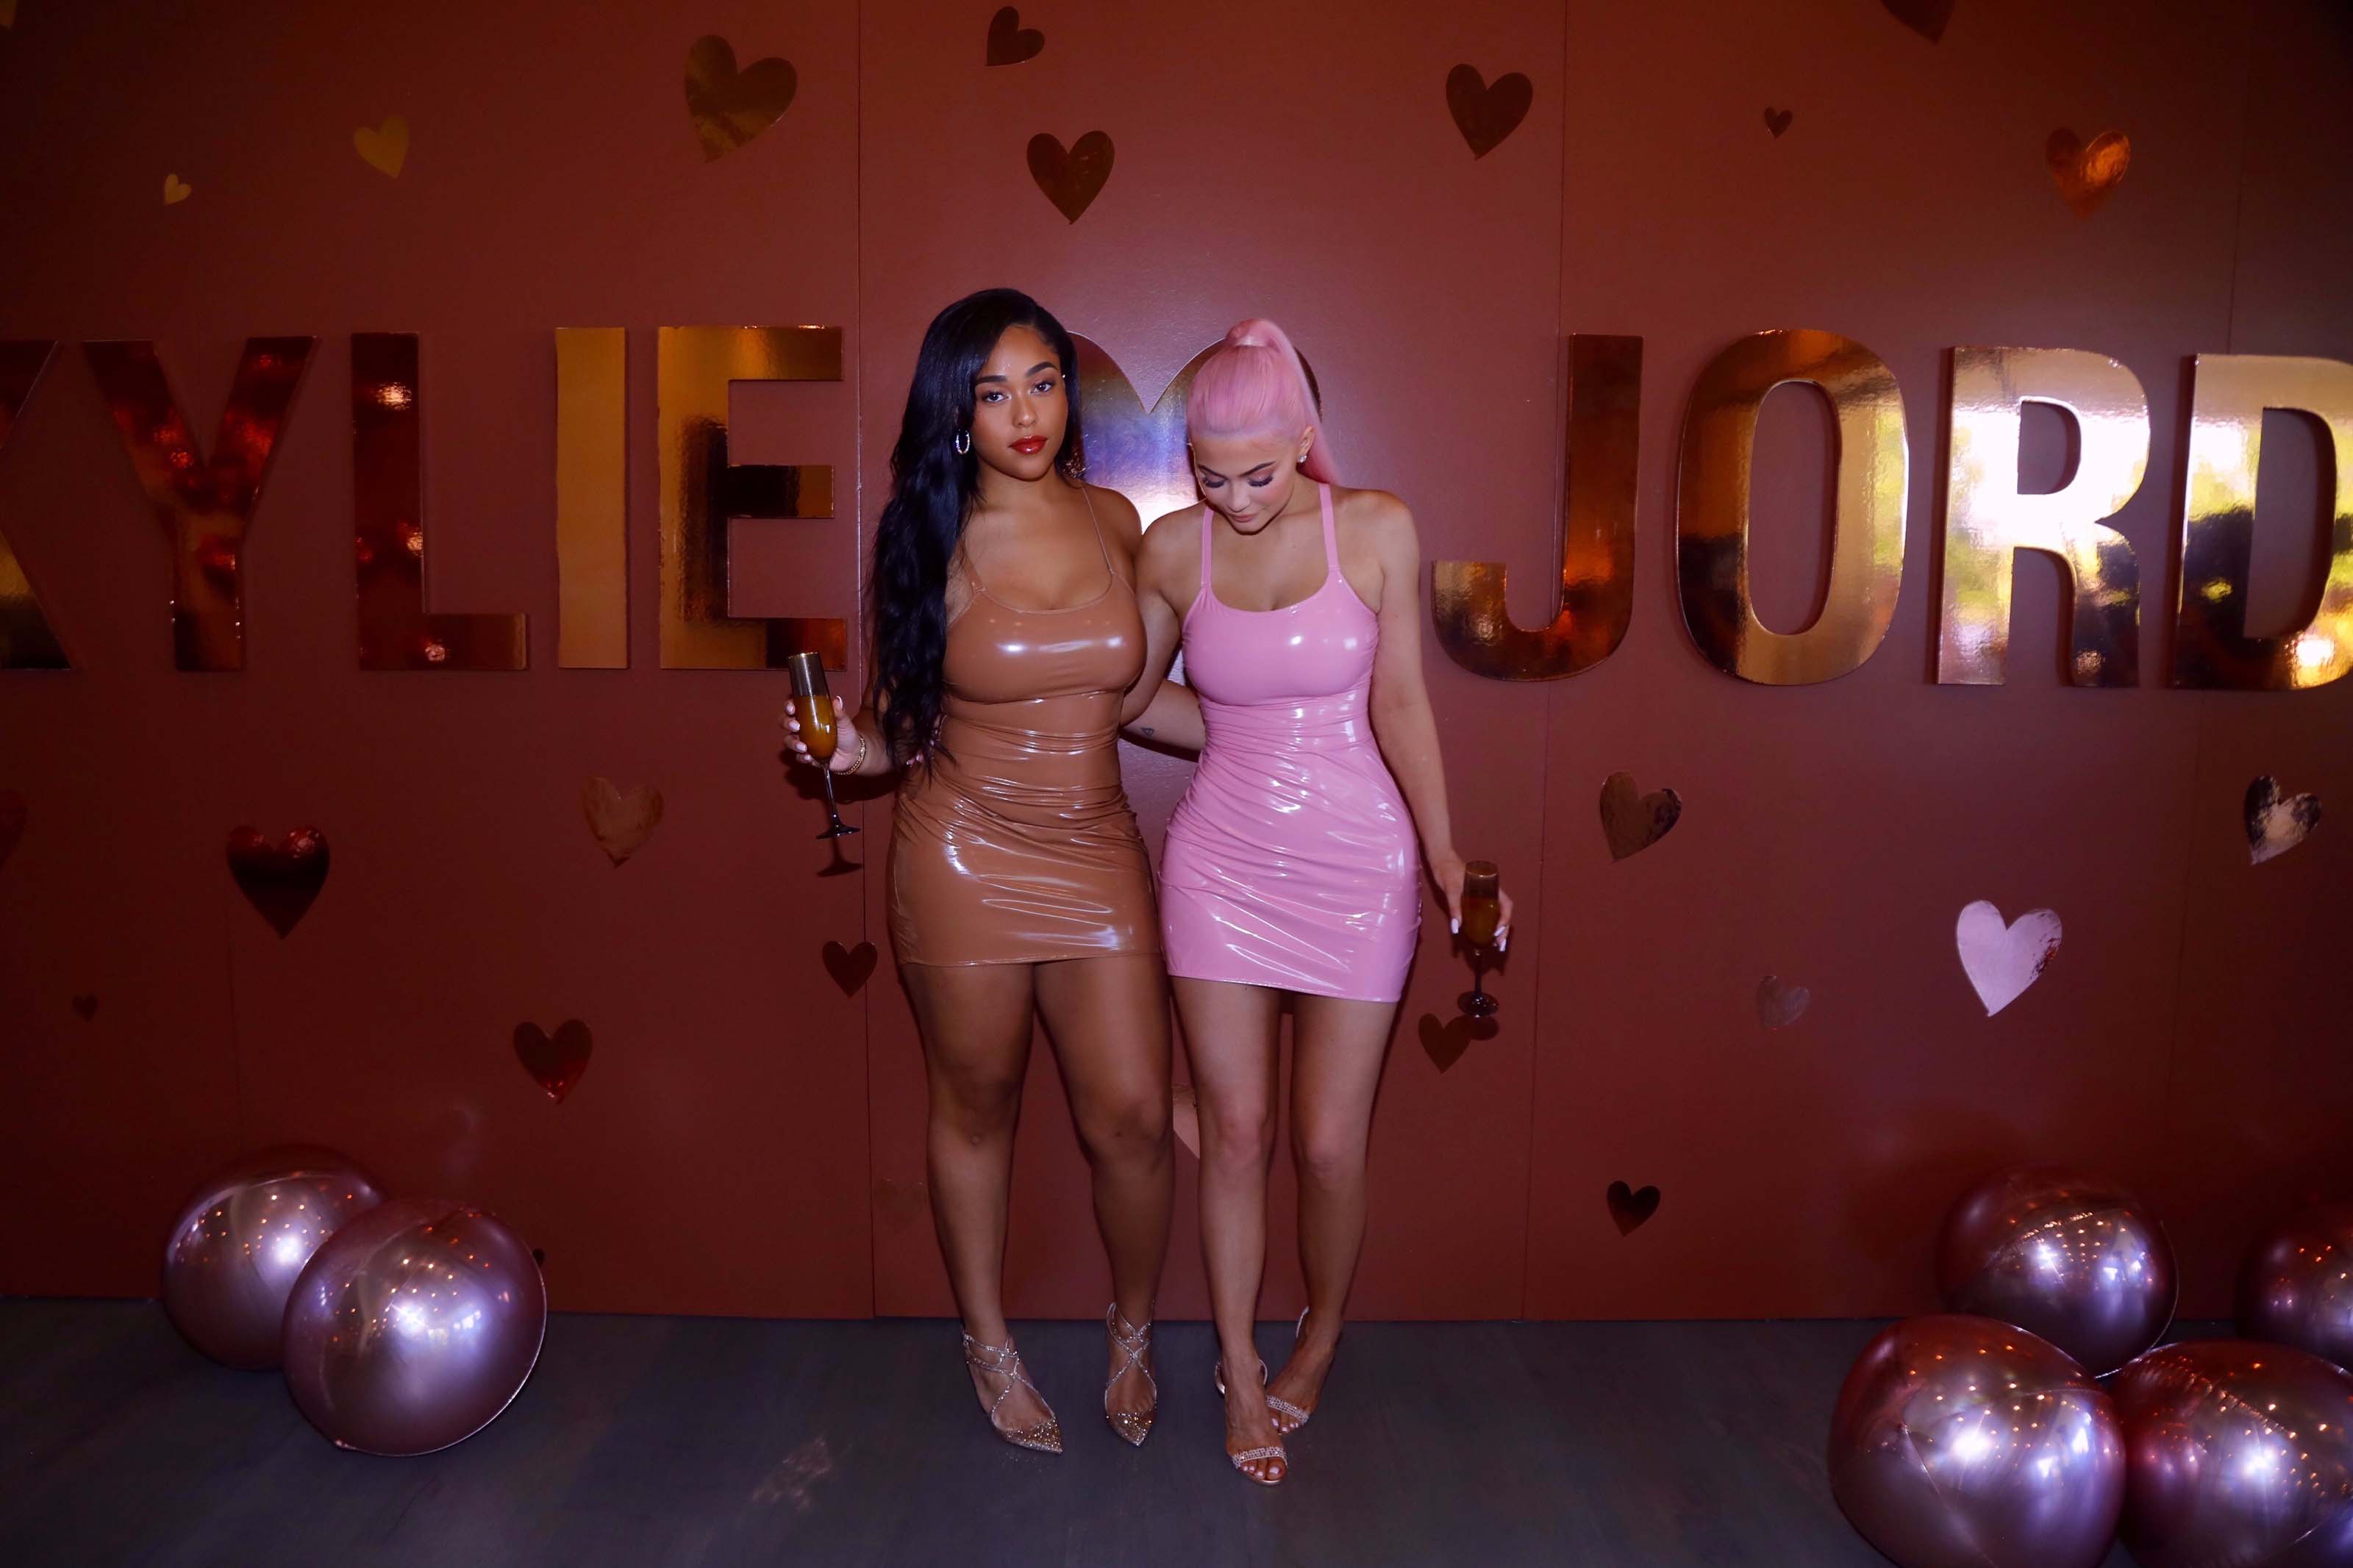 Kylie Jenner at Jordyn Woods for their make-up collaboration launch